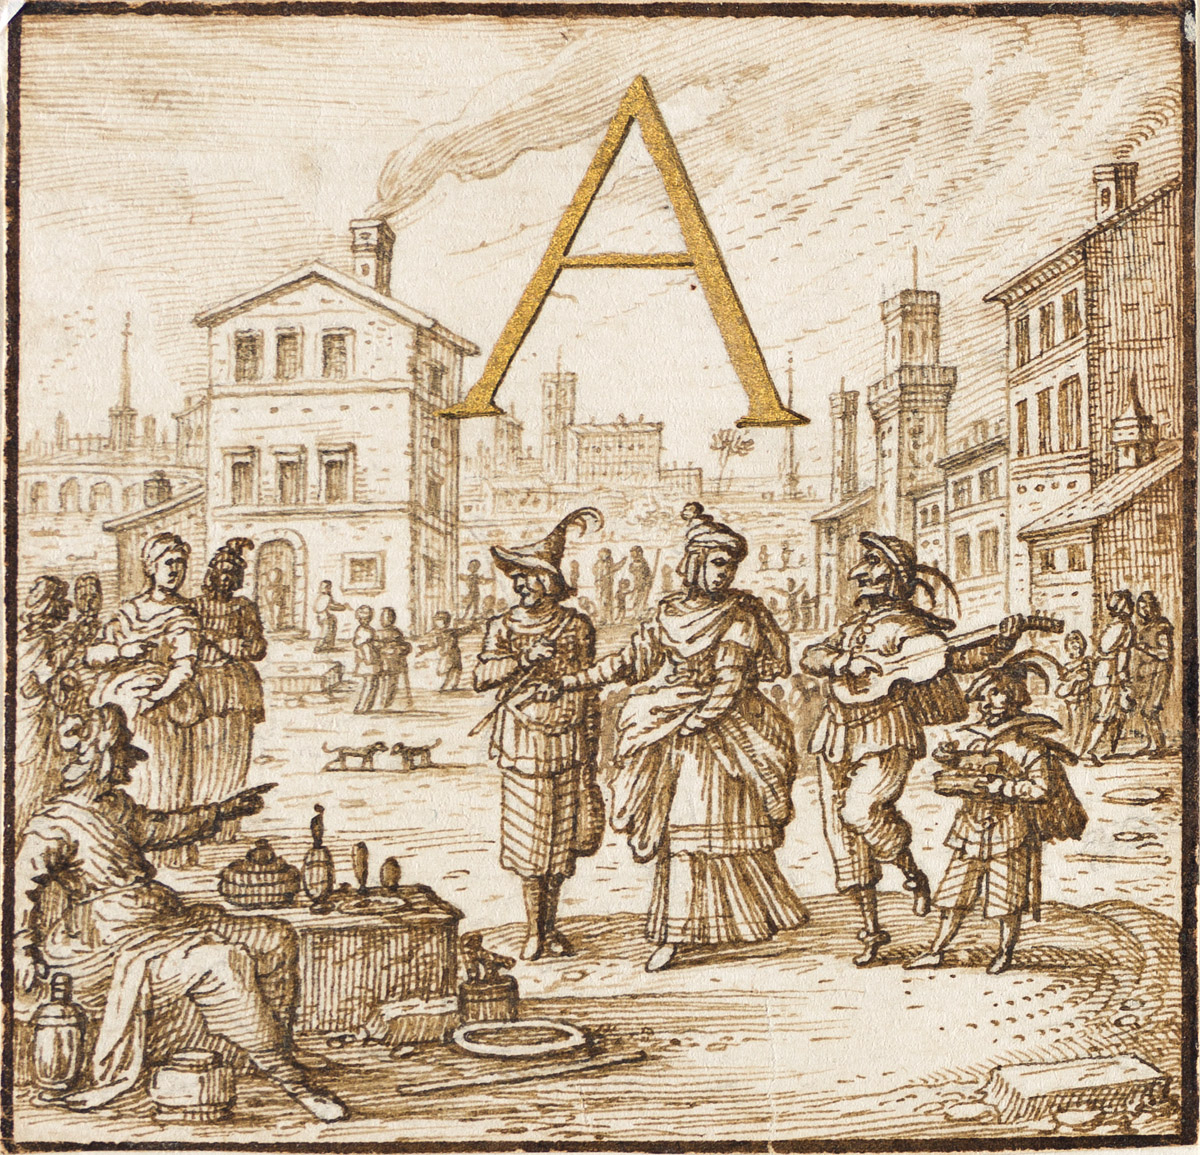 LIEVEN CRUYL (Ghent 1634-1709 Ghent) Group of 4 decorative designs for initial letters.